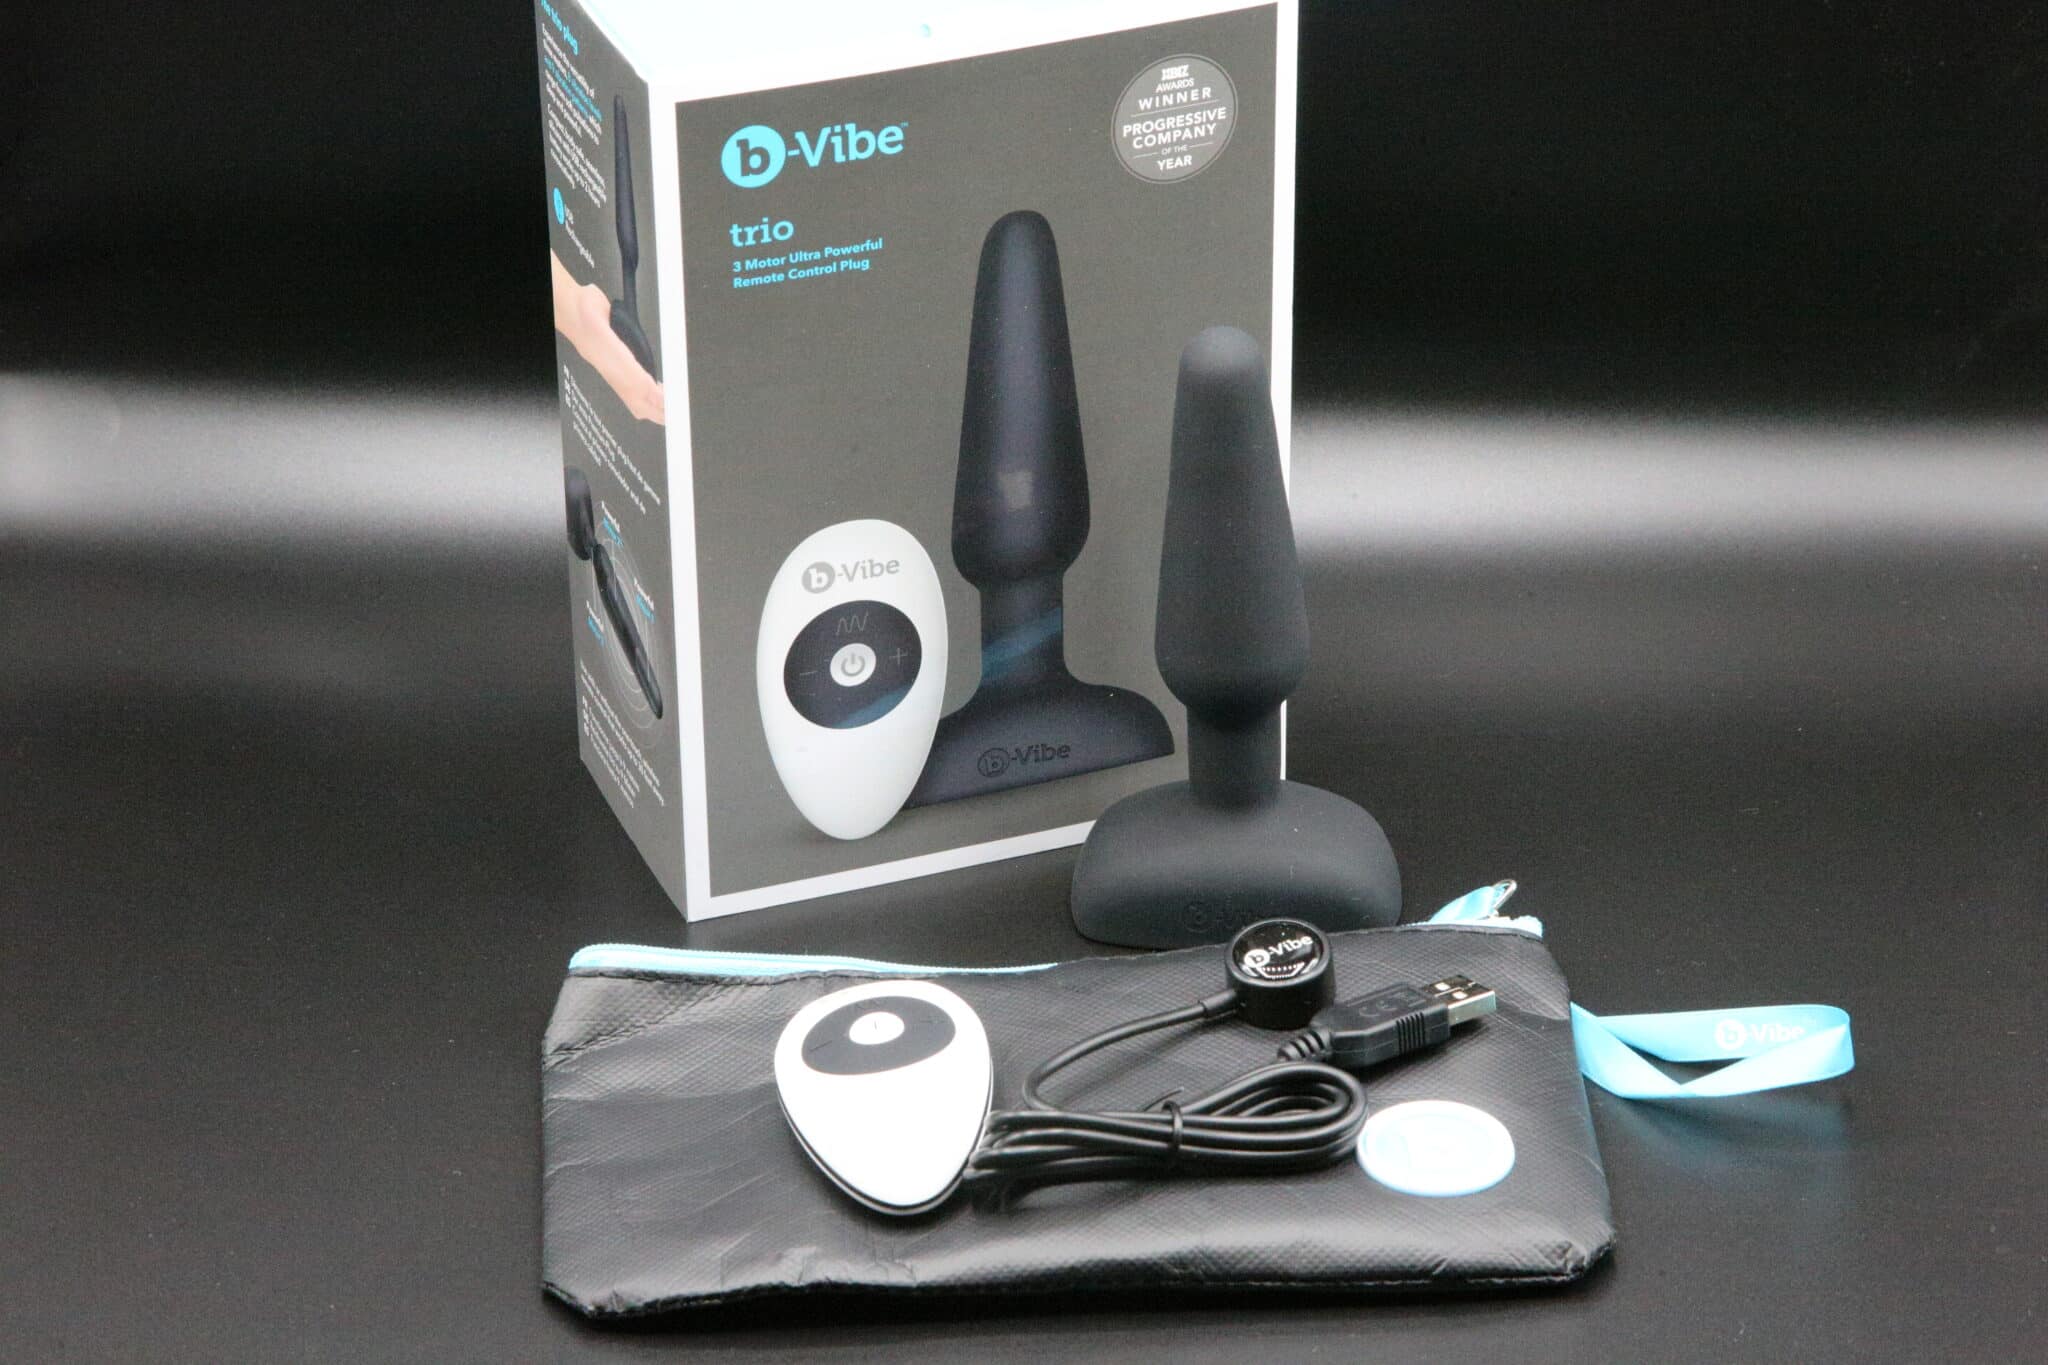 b-Vibe Trio Unwrapping the b-Vibe Trio: A Look at the Packaging